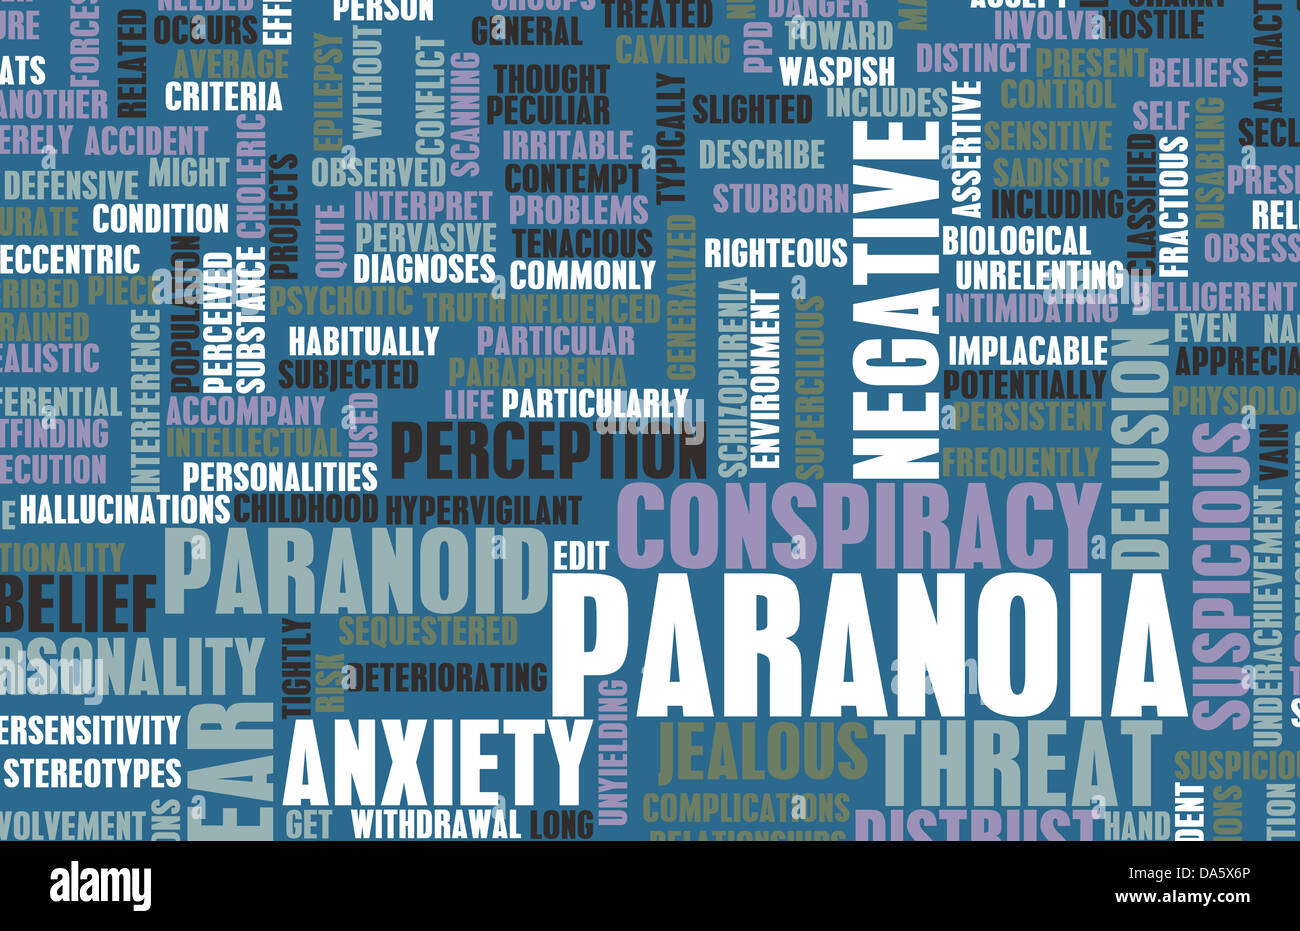 Paranoid and Paranoid Mental Anxiety as Concept Stock Photo